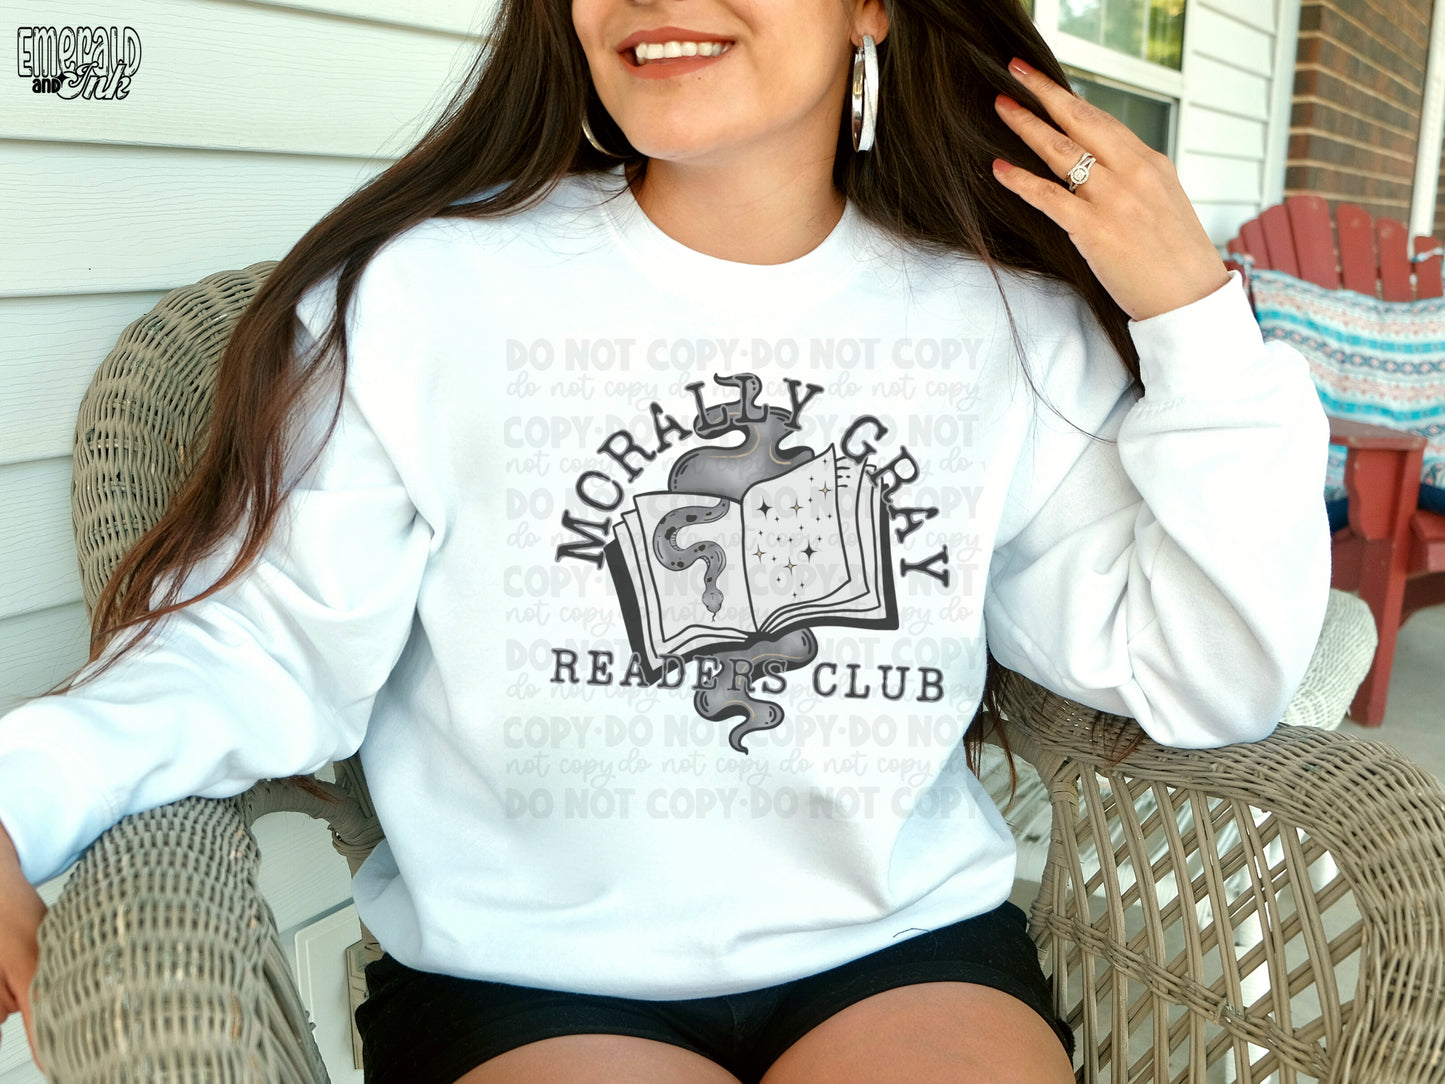 Morally gray readers club - Adult Size Sublimation Transfer